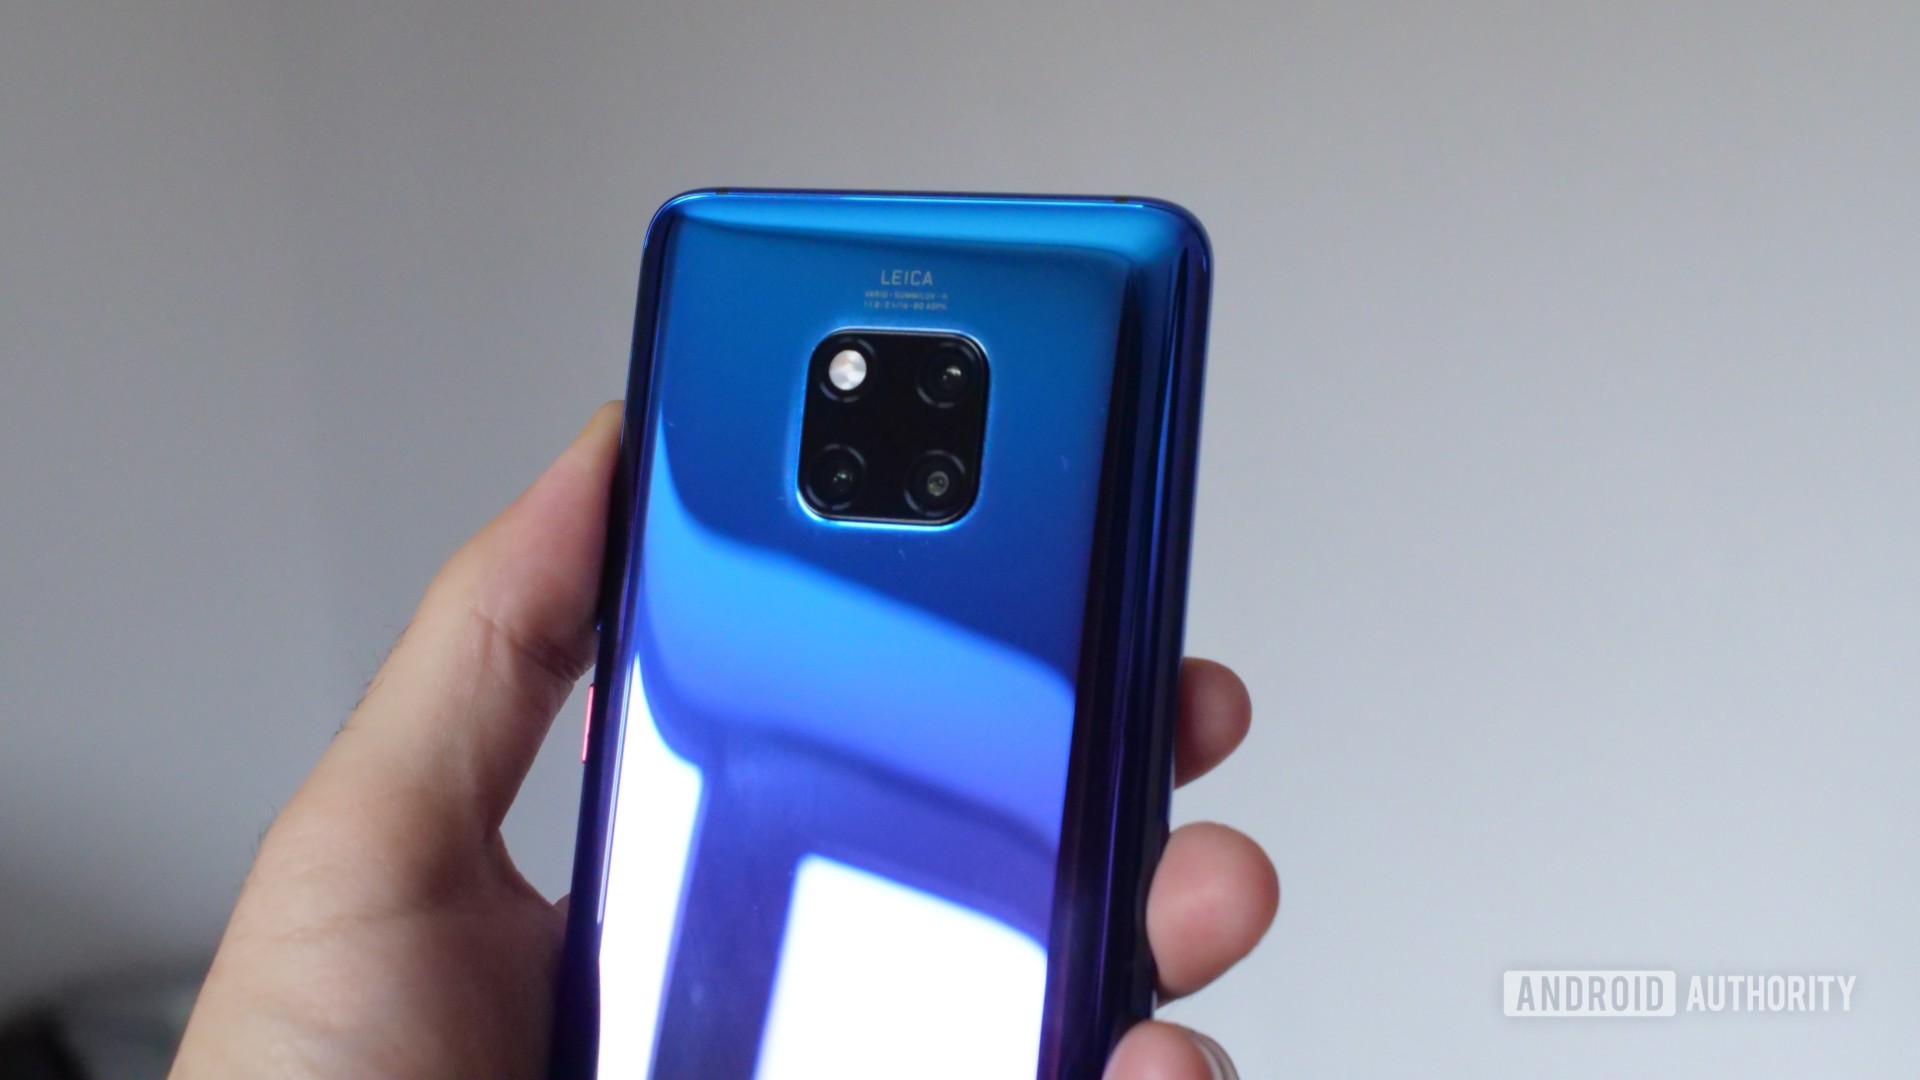 Mate 20 Pro variant exclusive to China is 35% cheaper than 